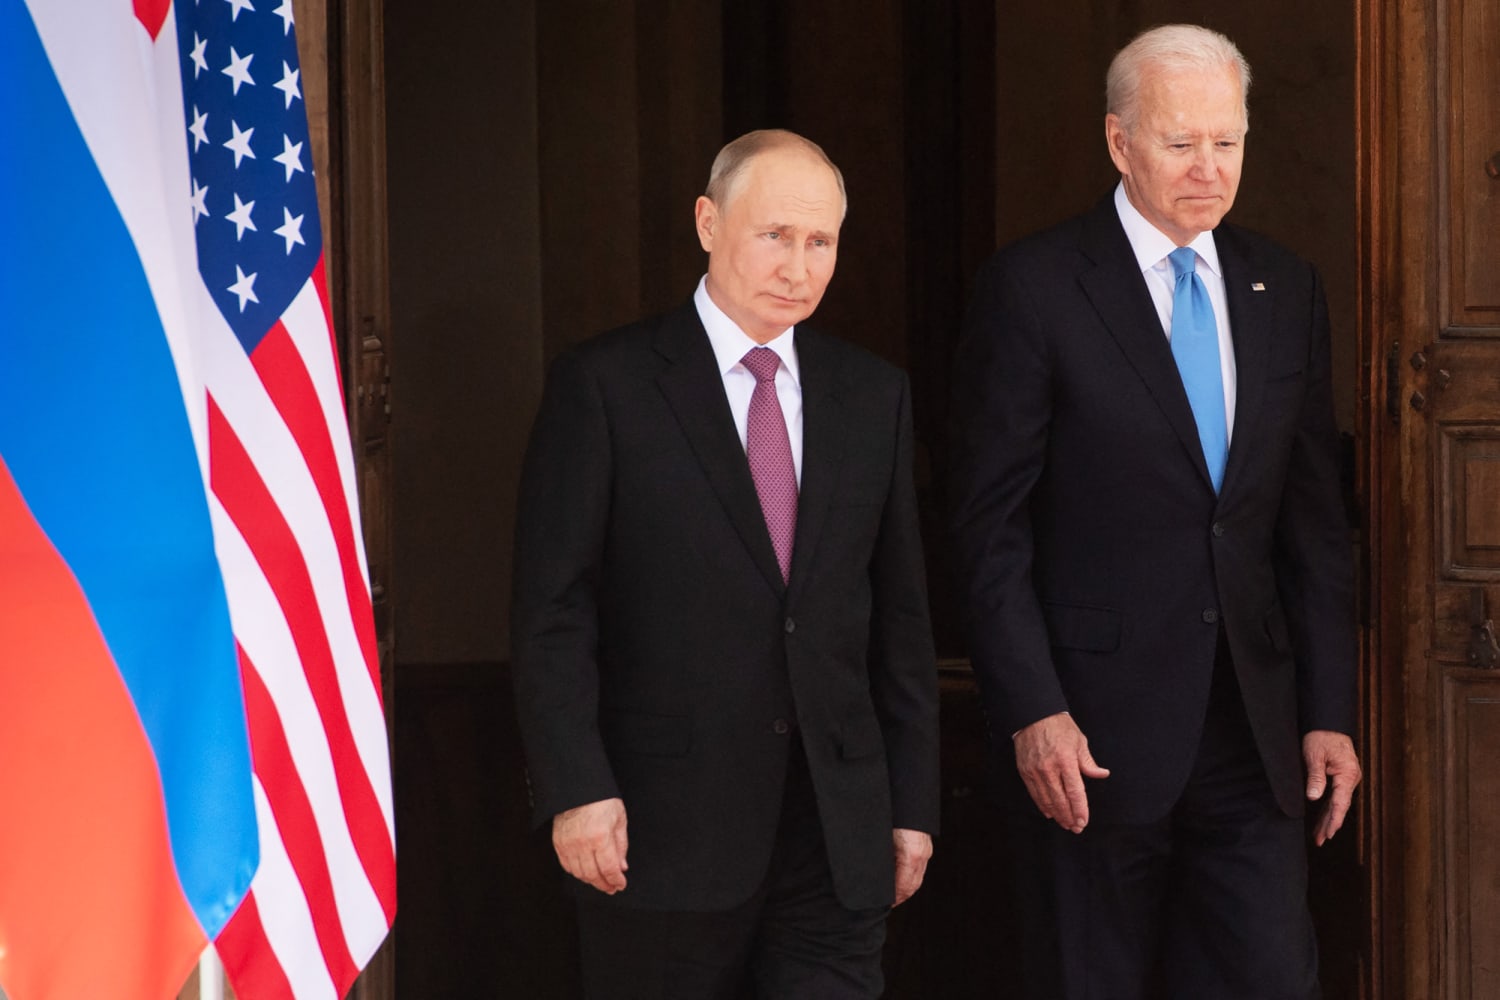 Biden to hold call with Putin on Thursday amid growing tensions